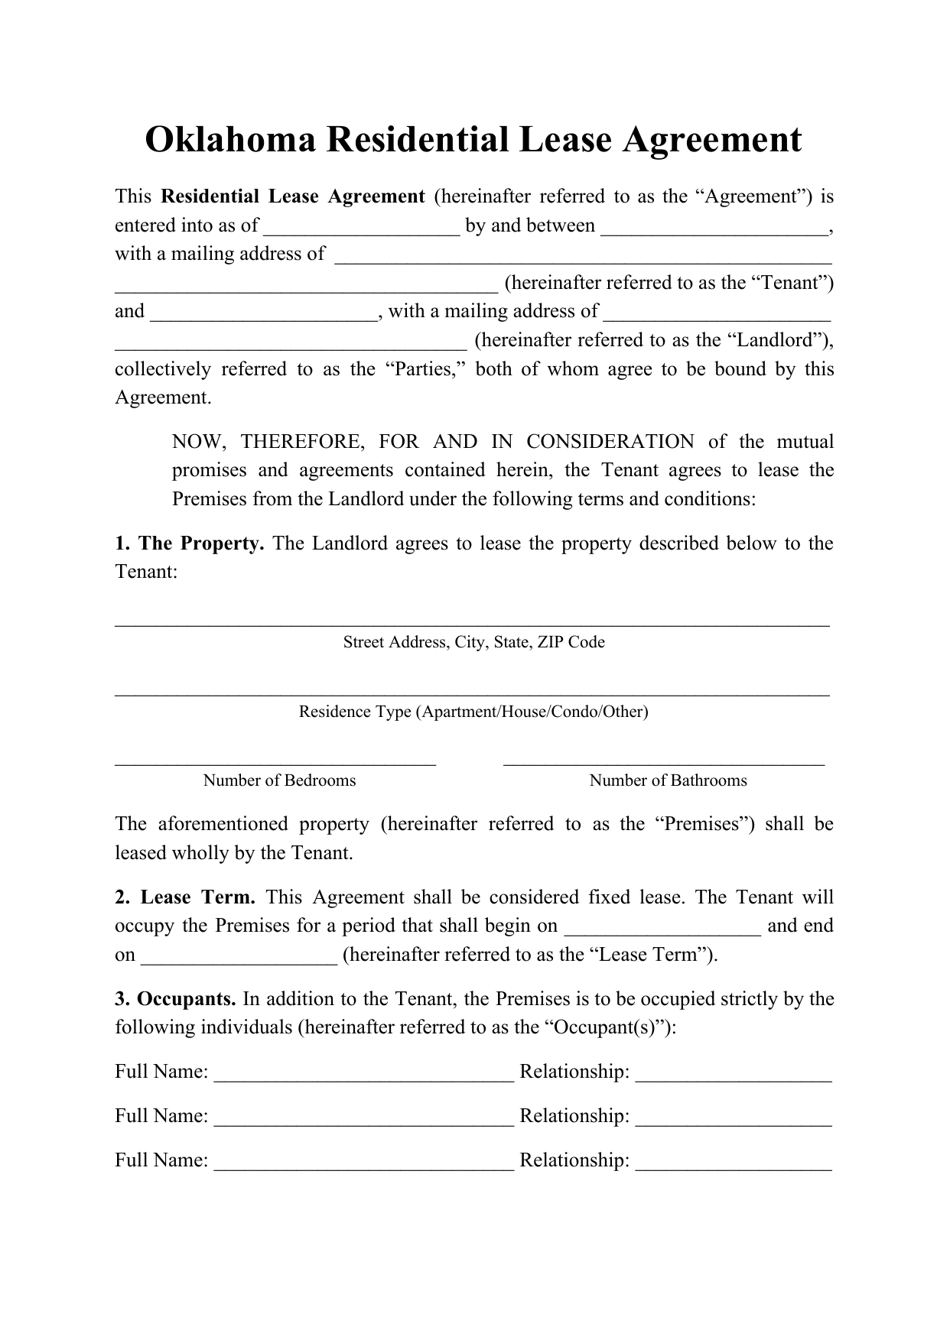 Residential Lease Agreement Template - Oklahoma, Page 1